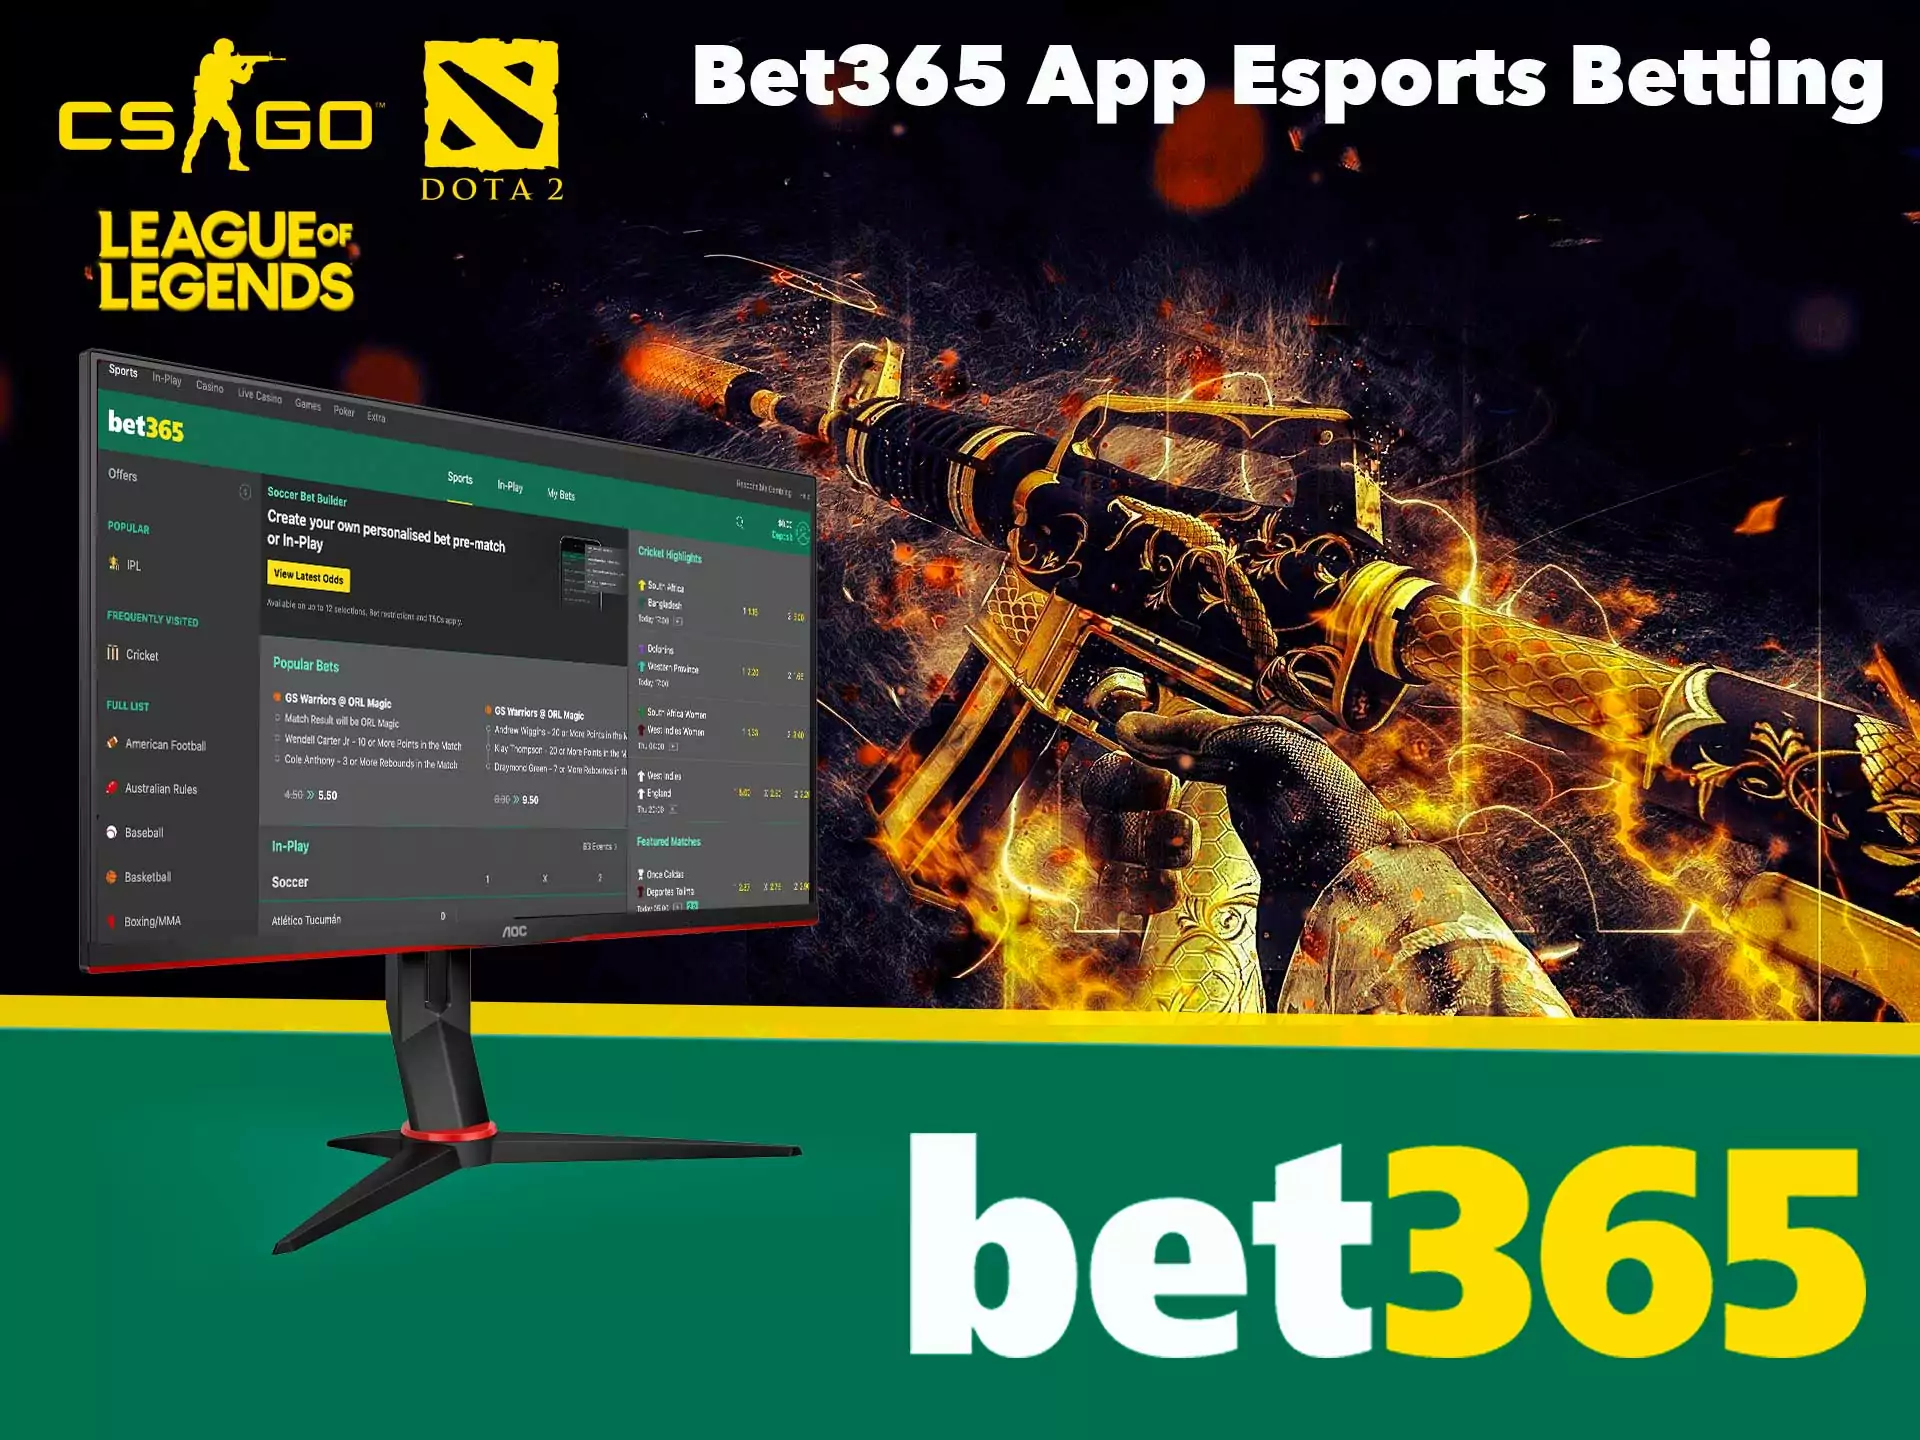 The Bet365 app makes it easy to bet on the rapidly growing Cybersport industry.